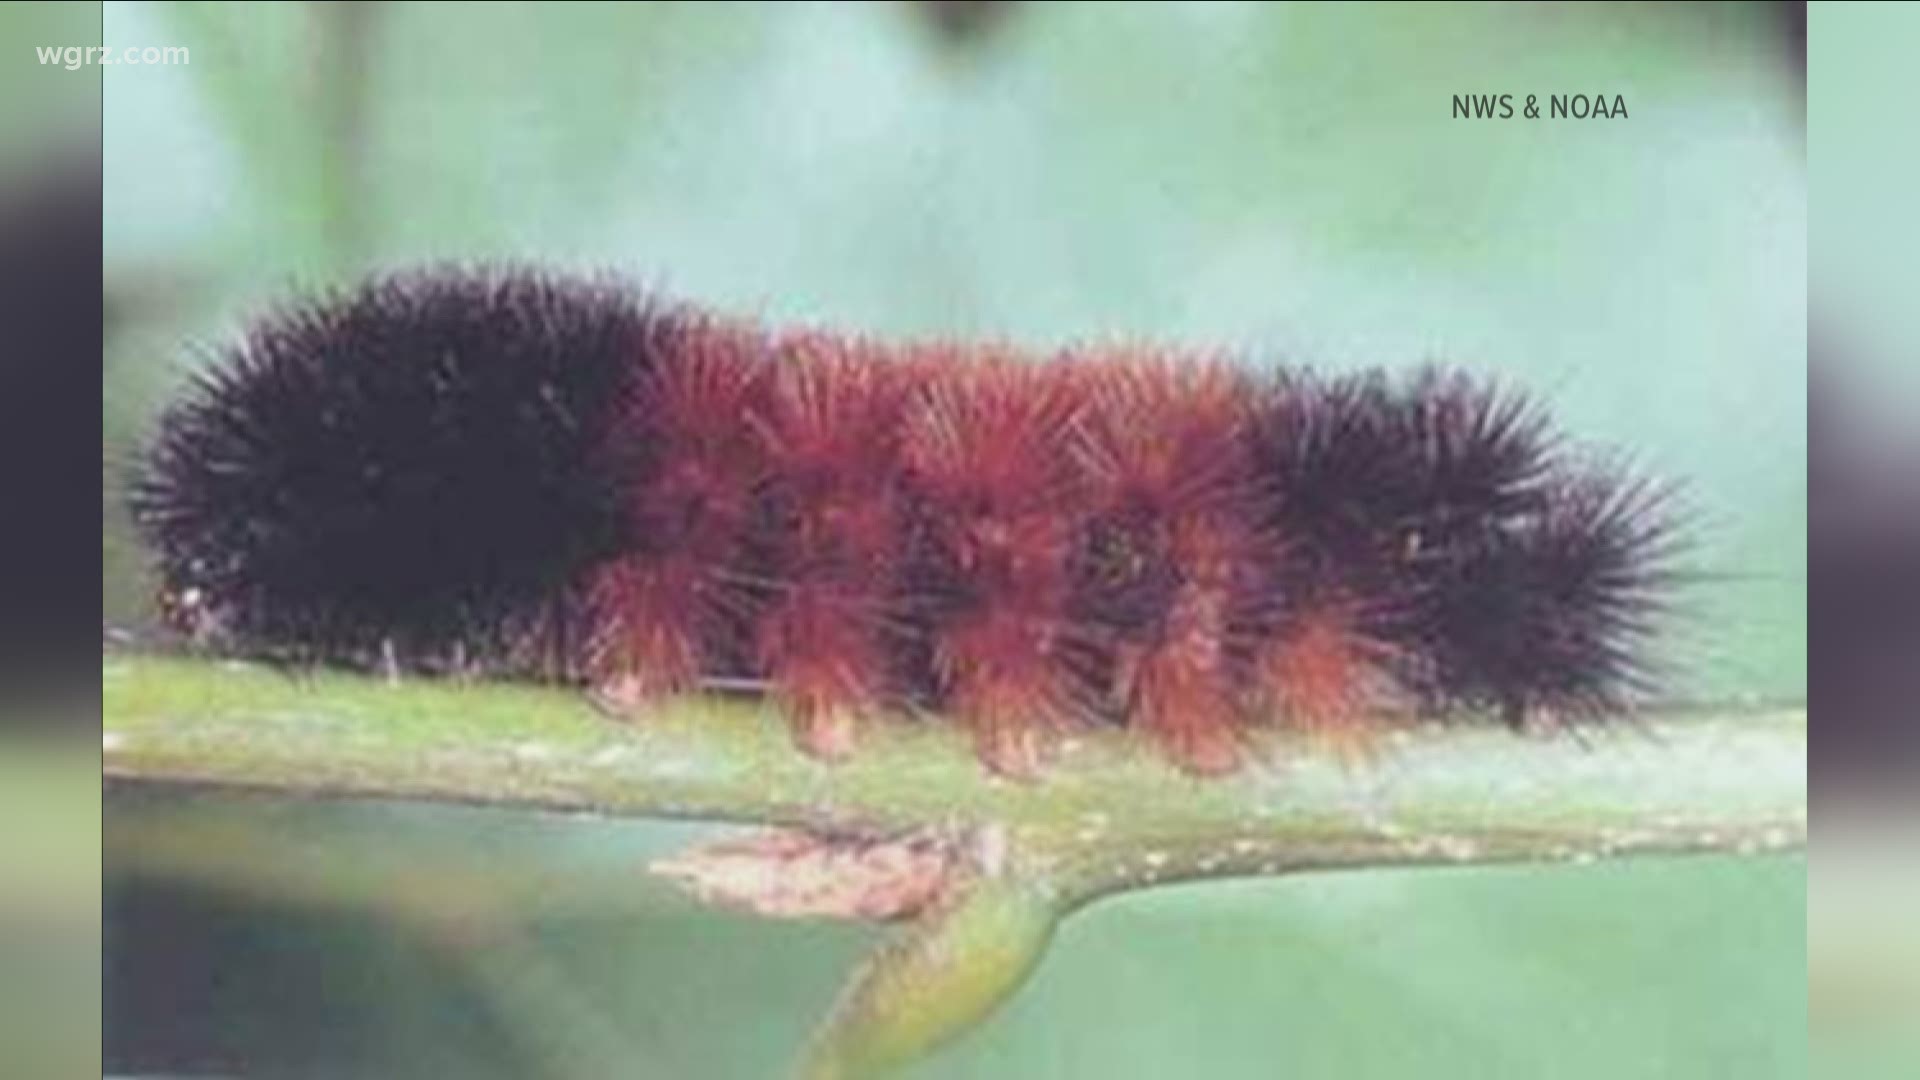 Woolly worms spotted in Western New York